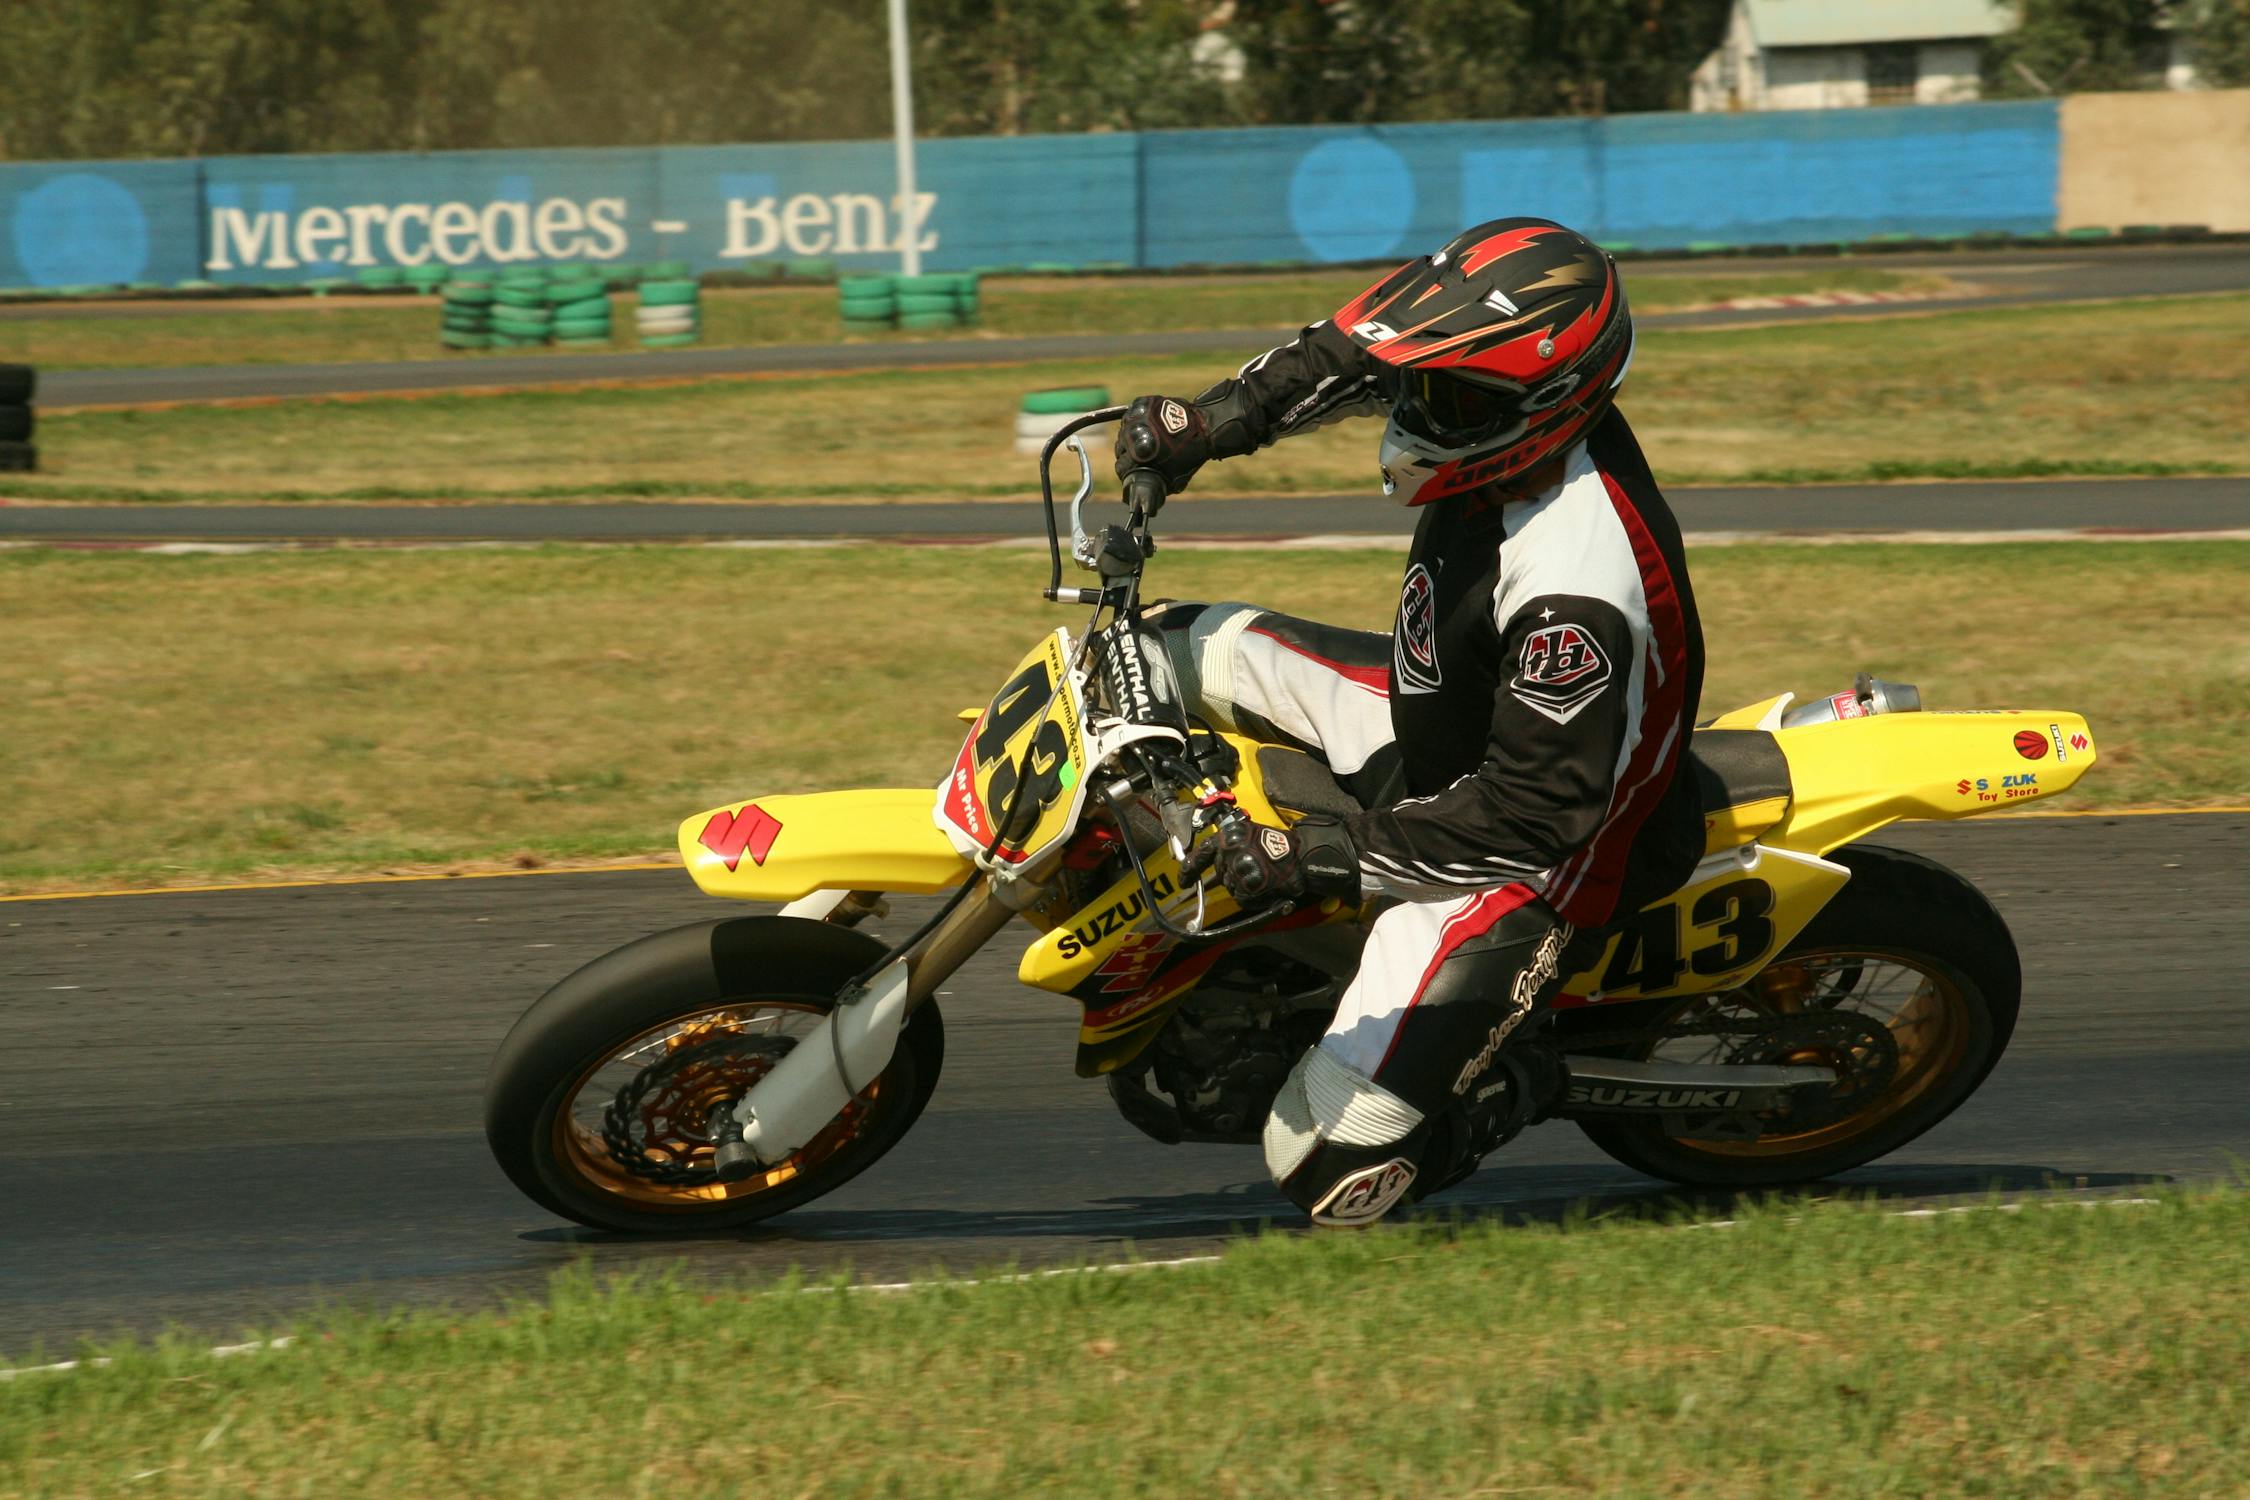 Racer Driving a Motorcycle on a Race Track · Free Stock Photo